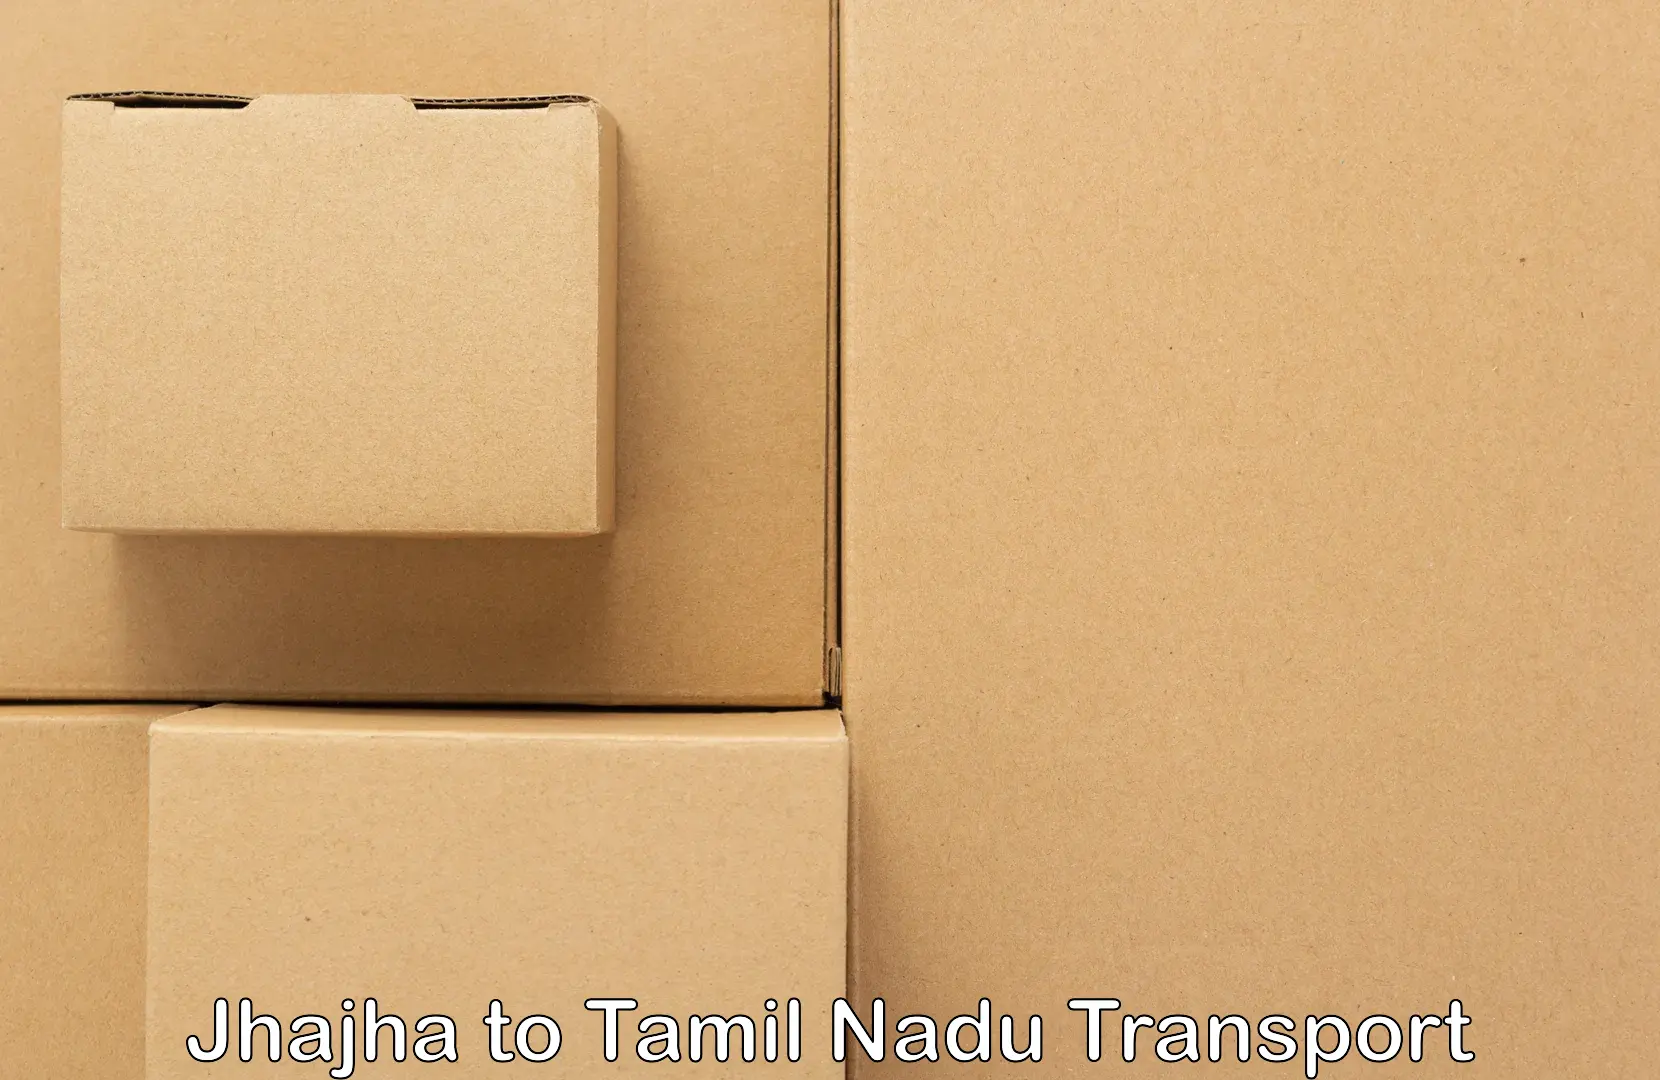 Nationwide transport services in Jhajha to Meenakshi Academy of Higher Education and Research Chennai